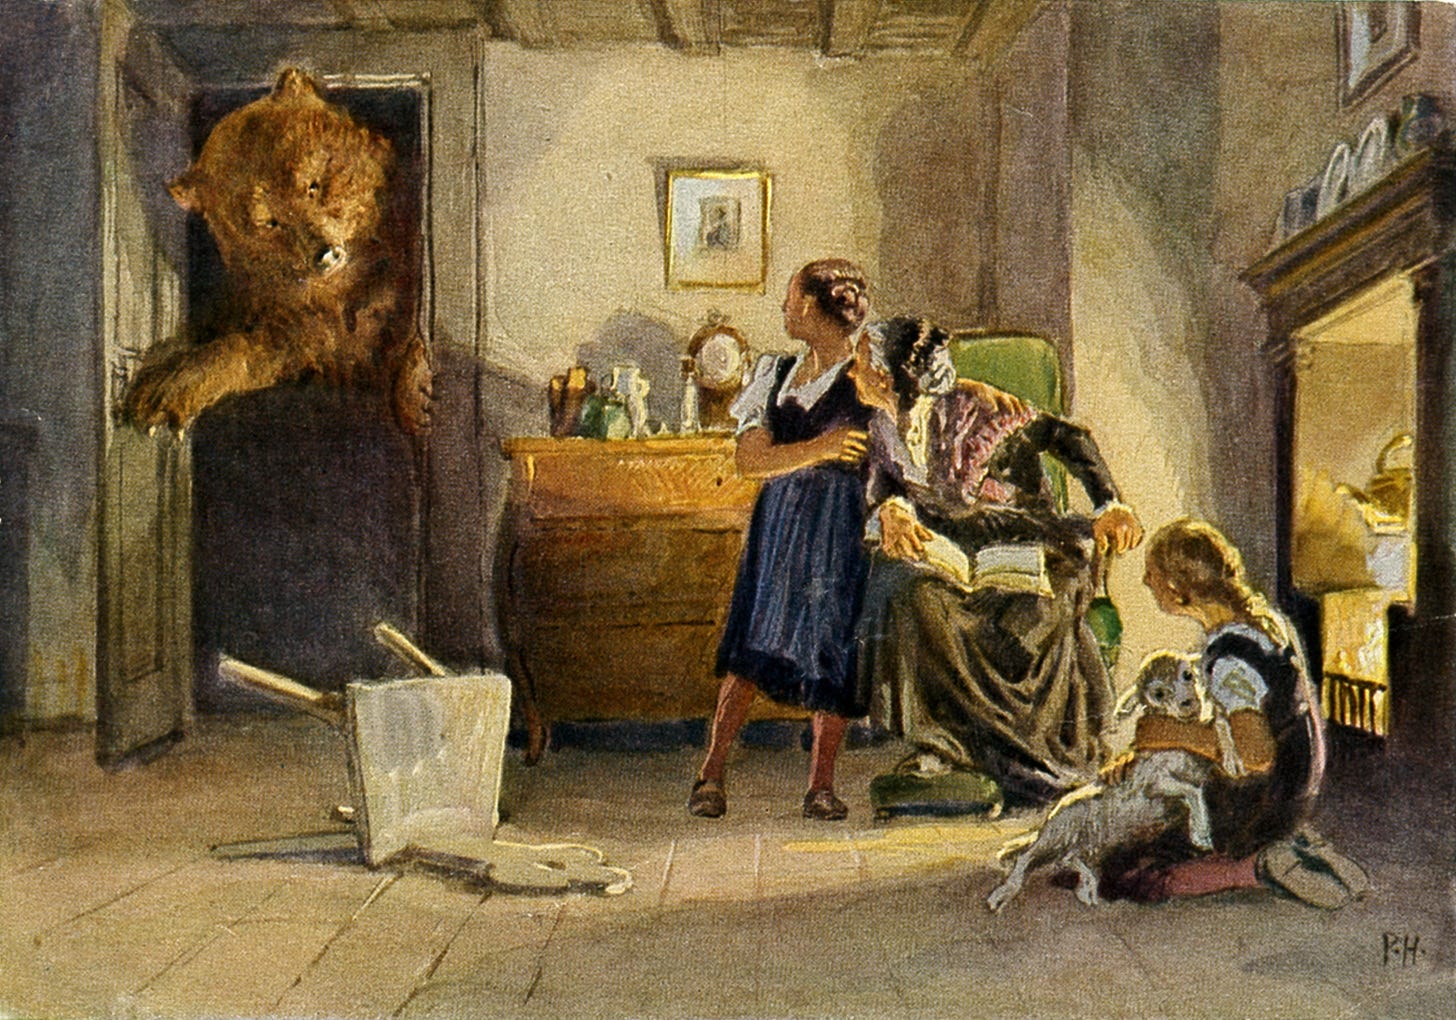 Bear entering room full of children in illustration from a Grimms' fairy tale